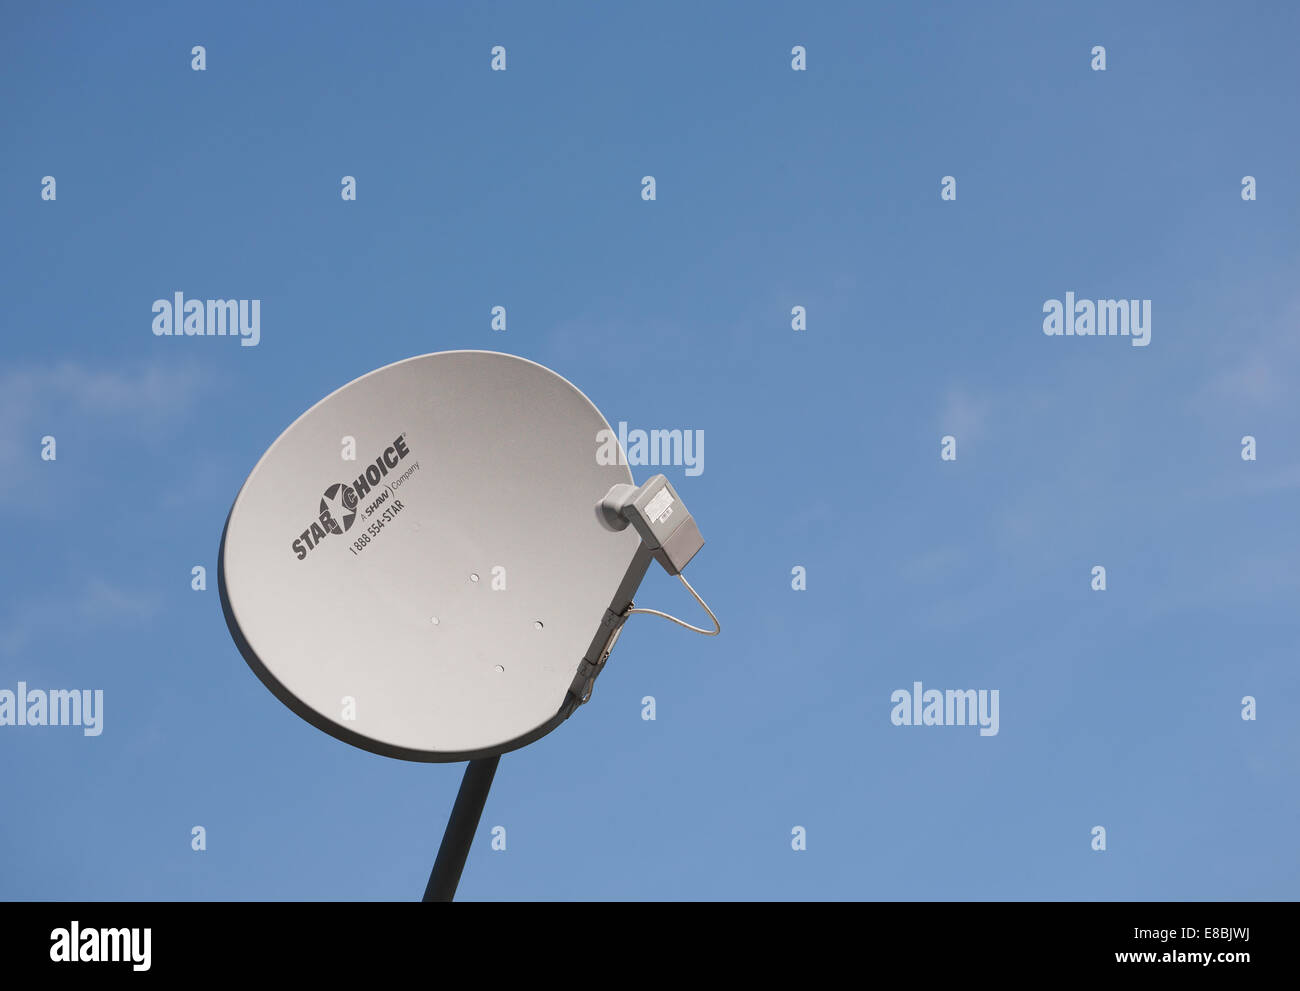 PLEASANT VALLEY, CANADA - OCTOBER 02, 2014: Shaw Direct satellite dish. Shaw Direct is a Canadian satellite television broadcast Stock Photo